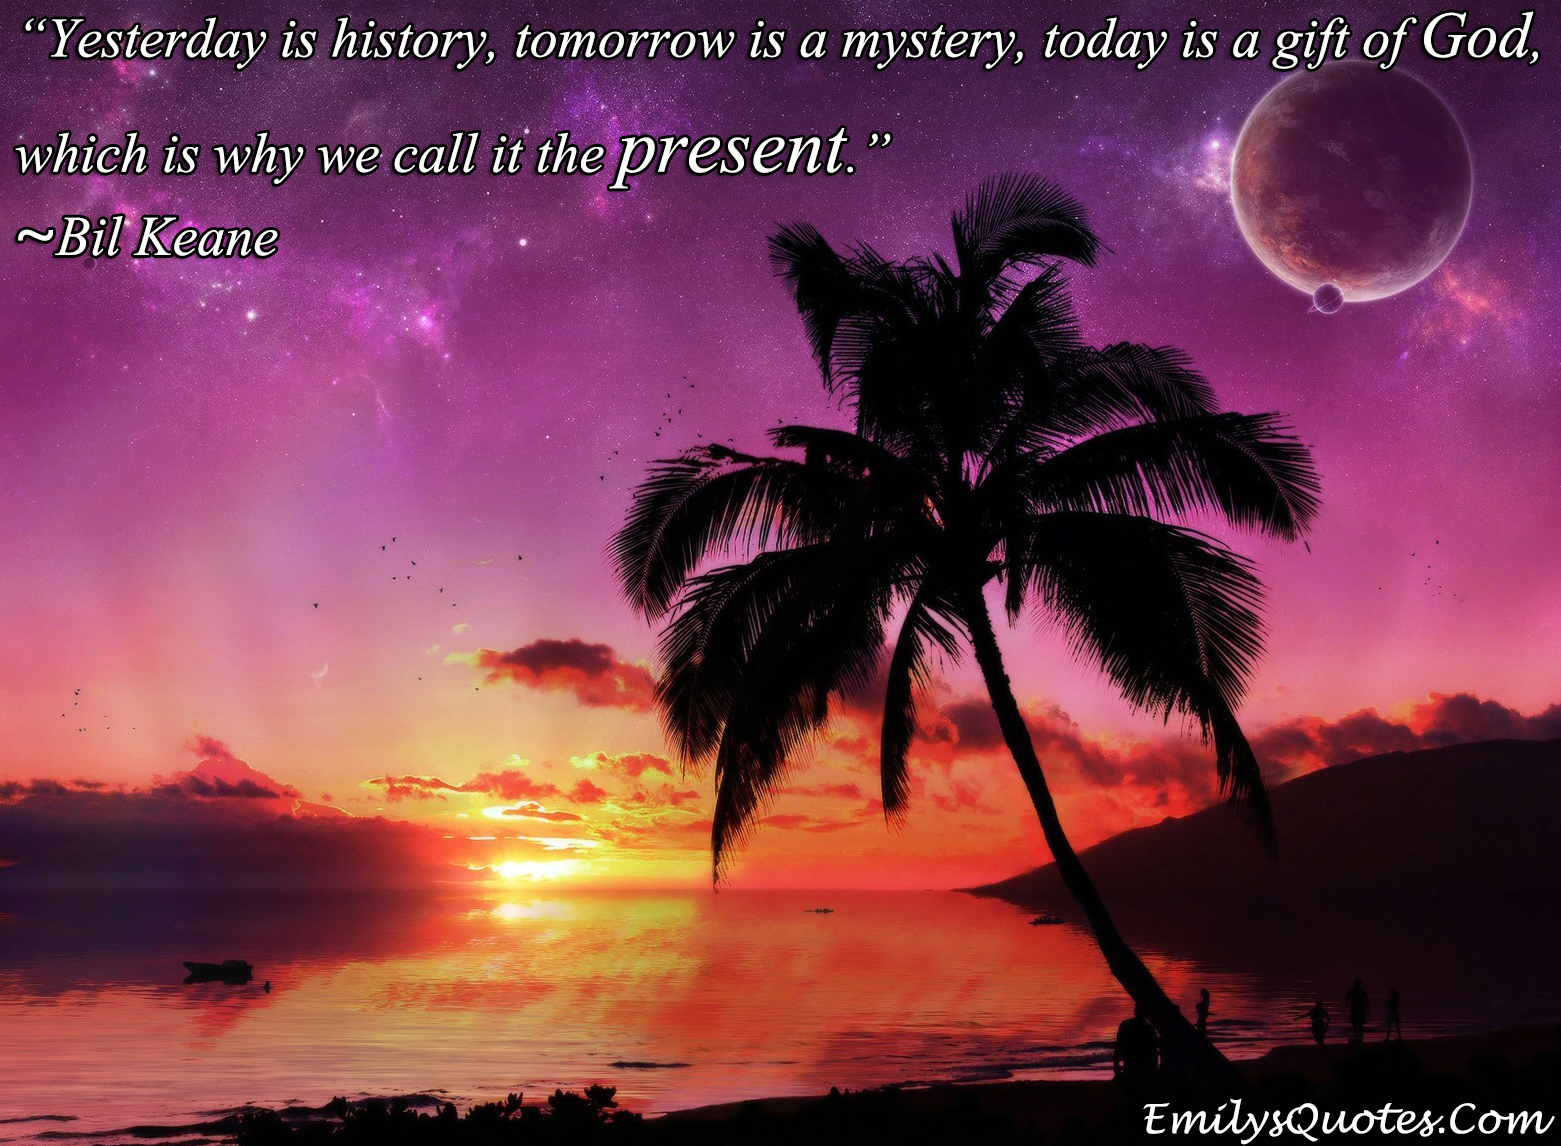 Yesterday is history, tomorrow is a mystery, today is a gift of God, which is why we call it the present